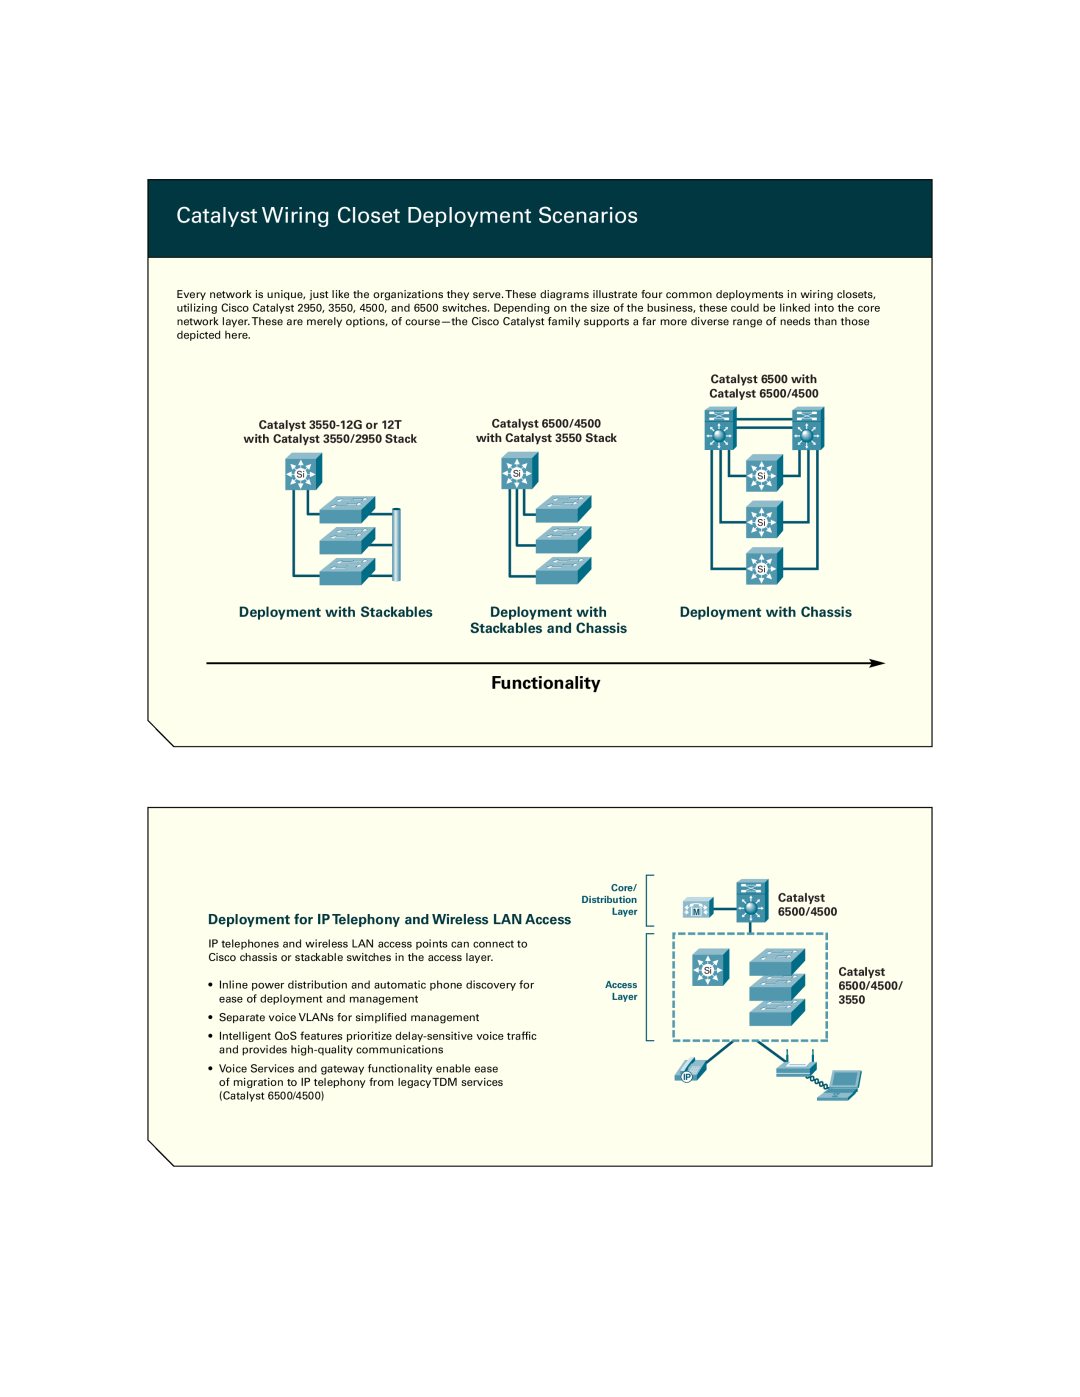 Cisco Systems Intelligent Switching Catalyst Wiring Closet Deployment Scenarios, Deployment with Stackables, Functionality 